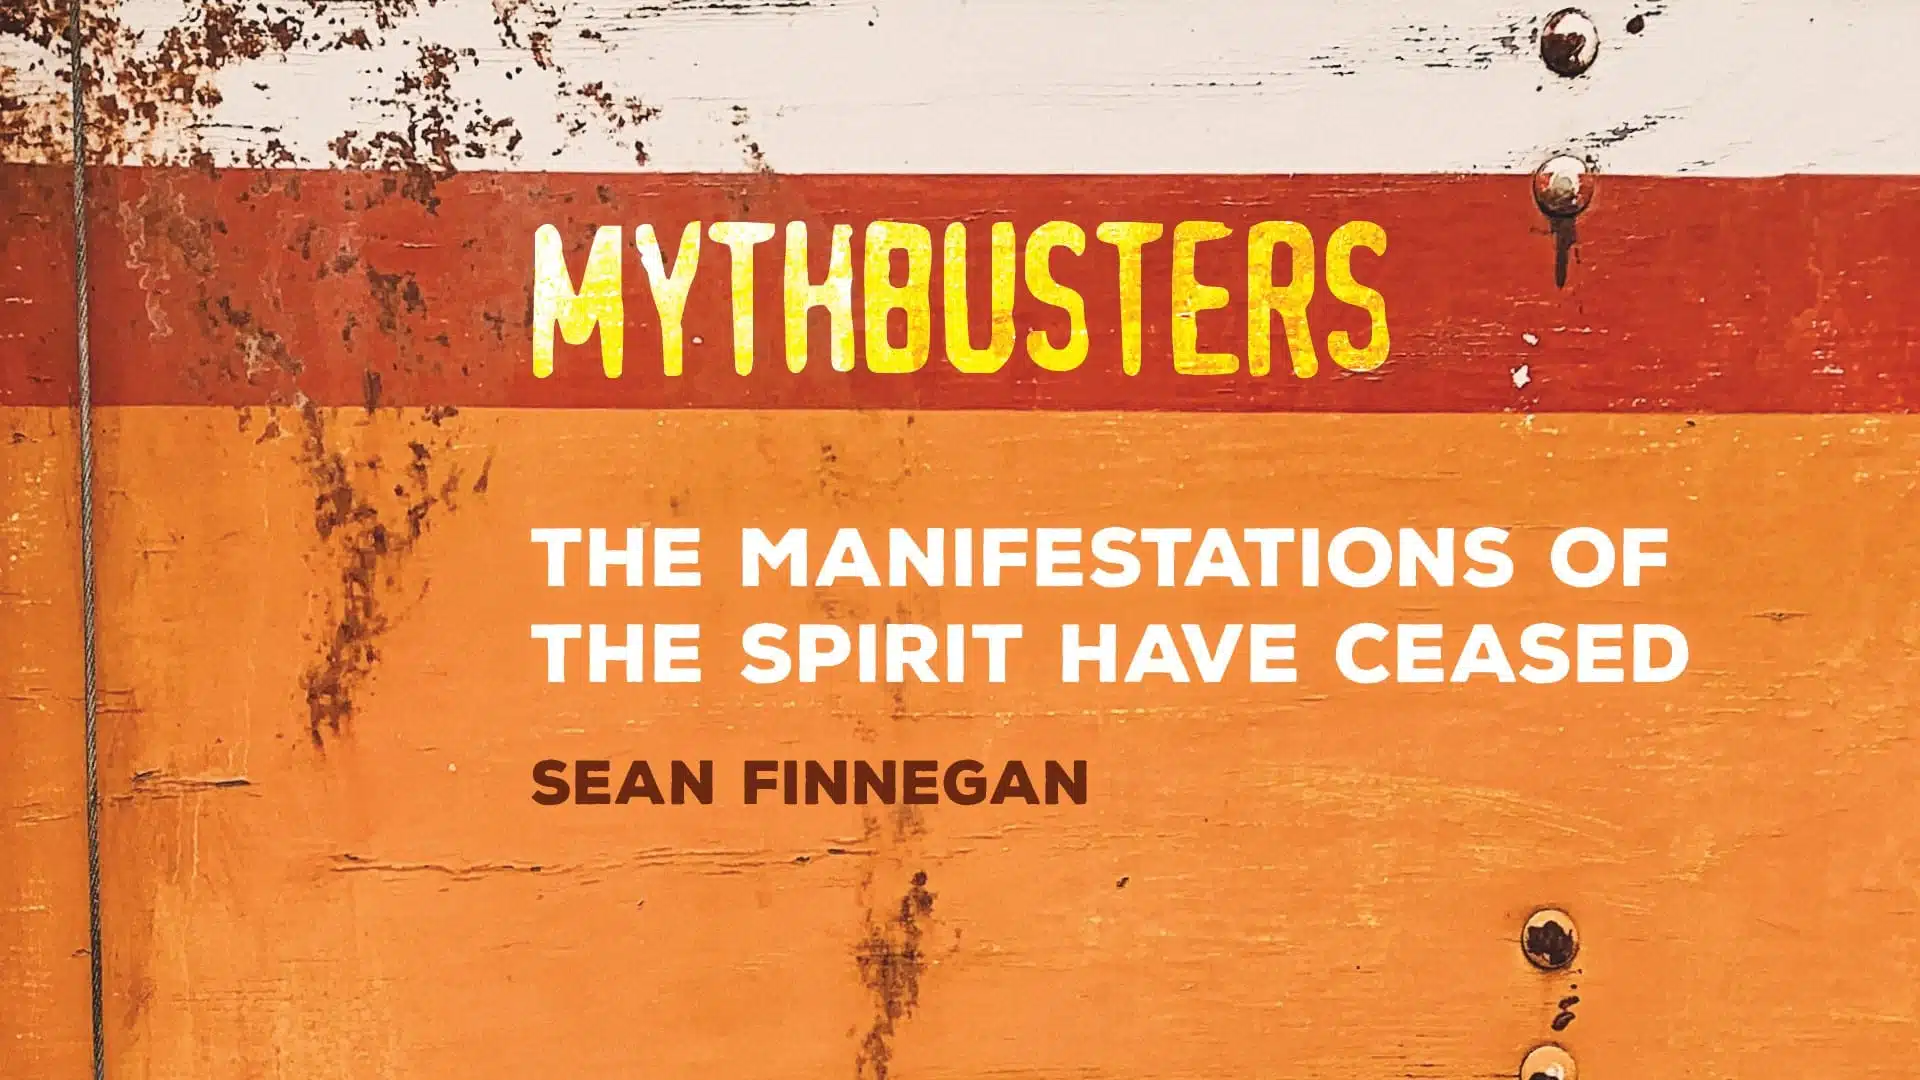 Myth: The Manifestations of the Spirit Have Ceased